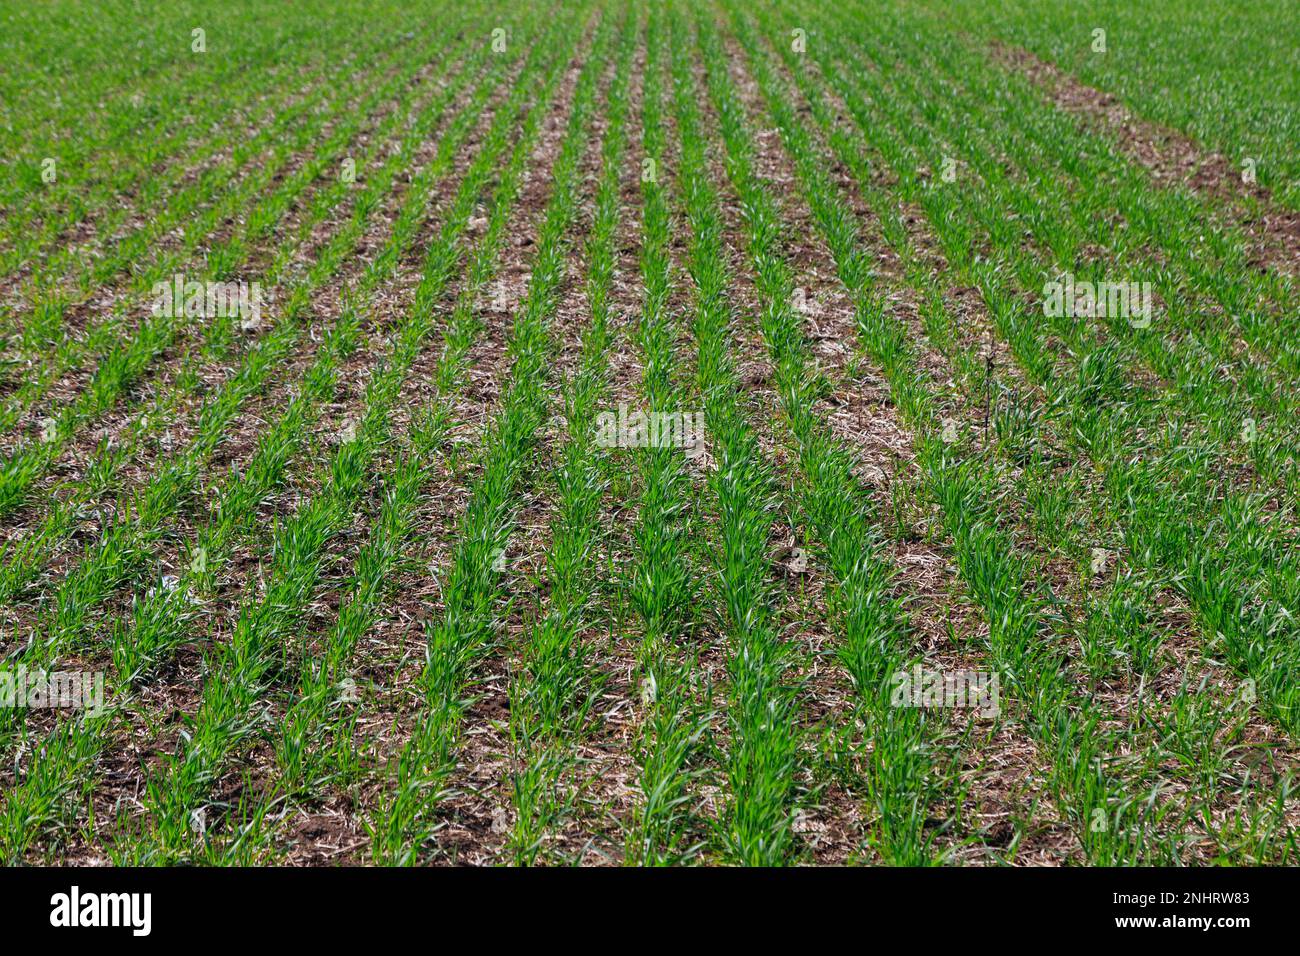 Open green field with sprouts planted in rows early spring. Spikelets of wheat or erysipelas. Agricultural plantations. Farming field. Herbal or grass Stock Photo